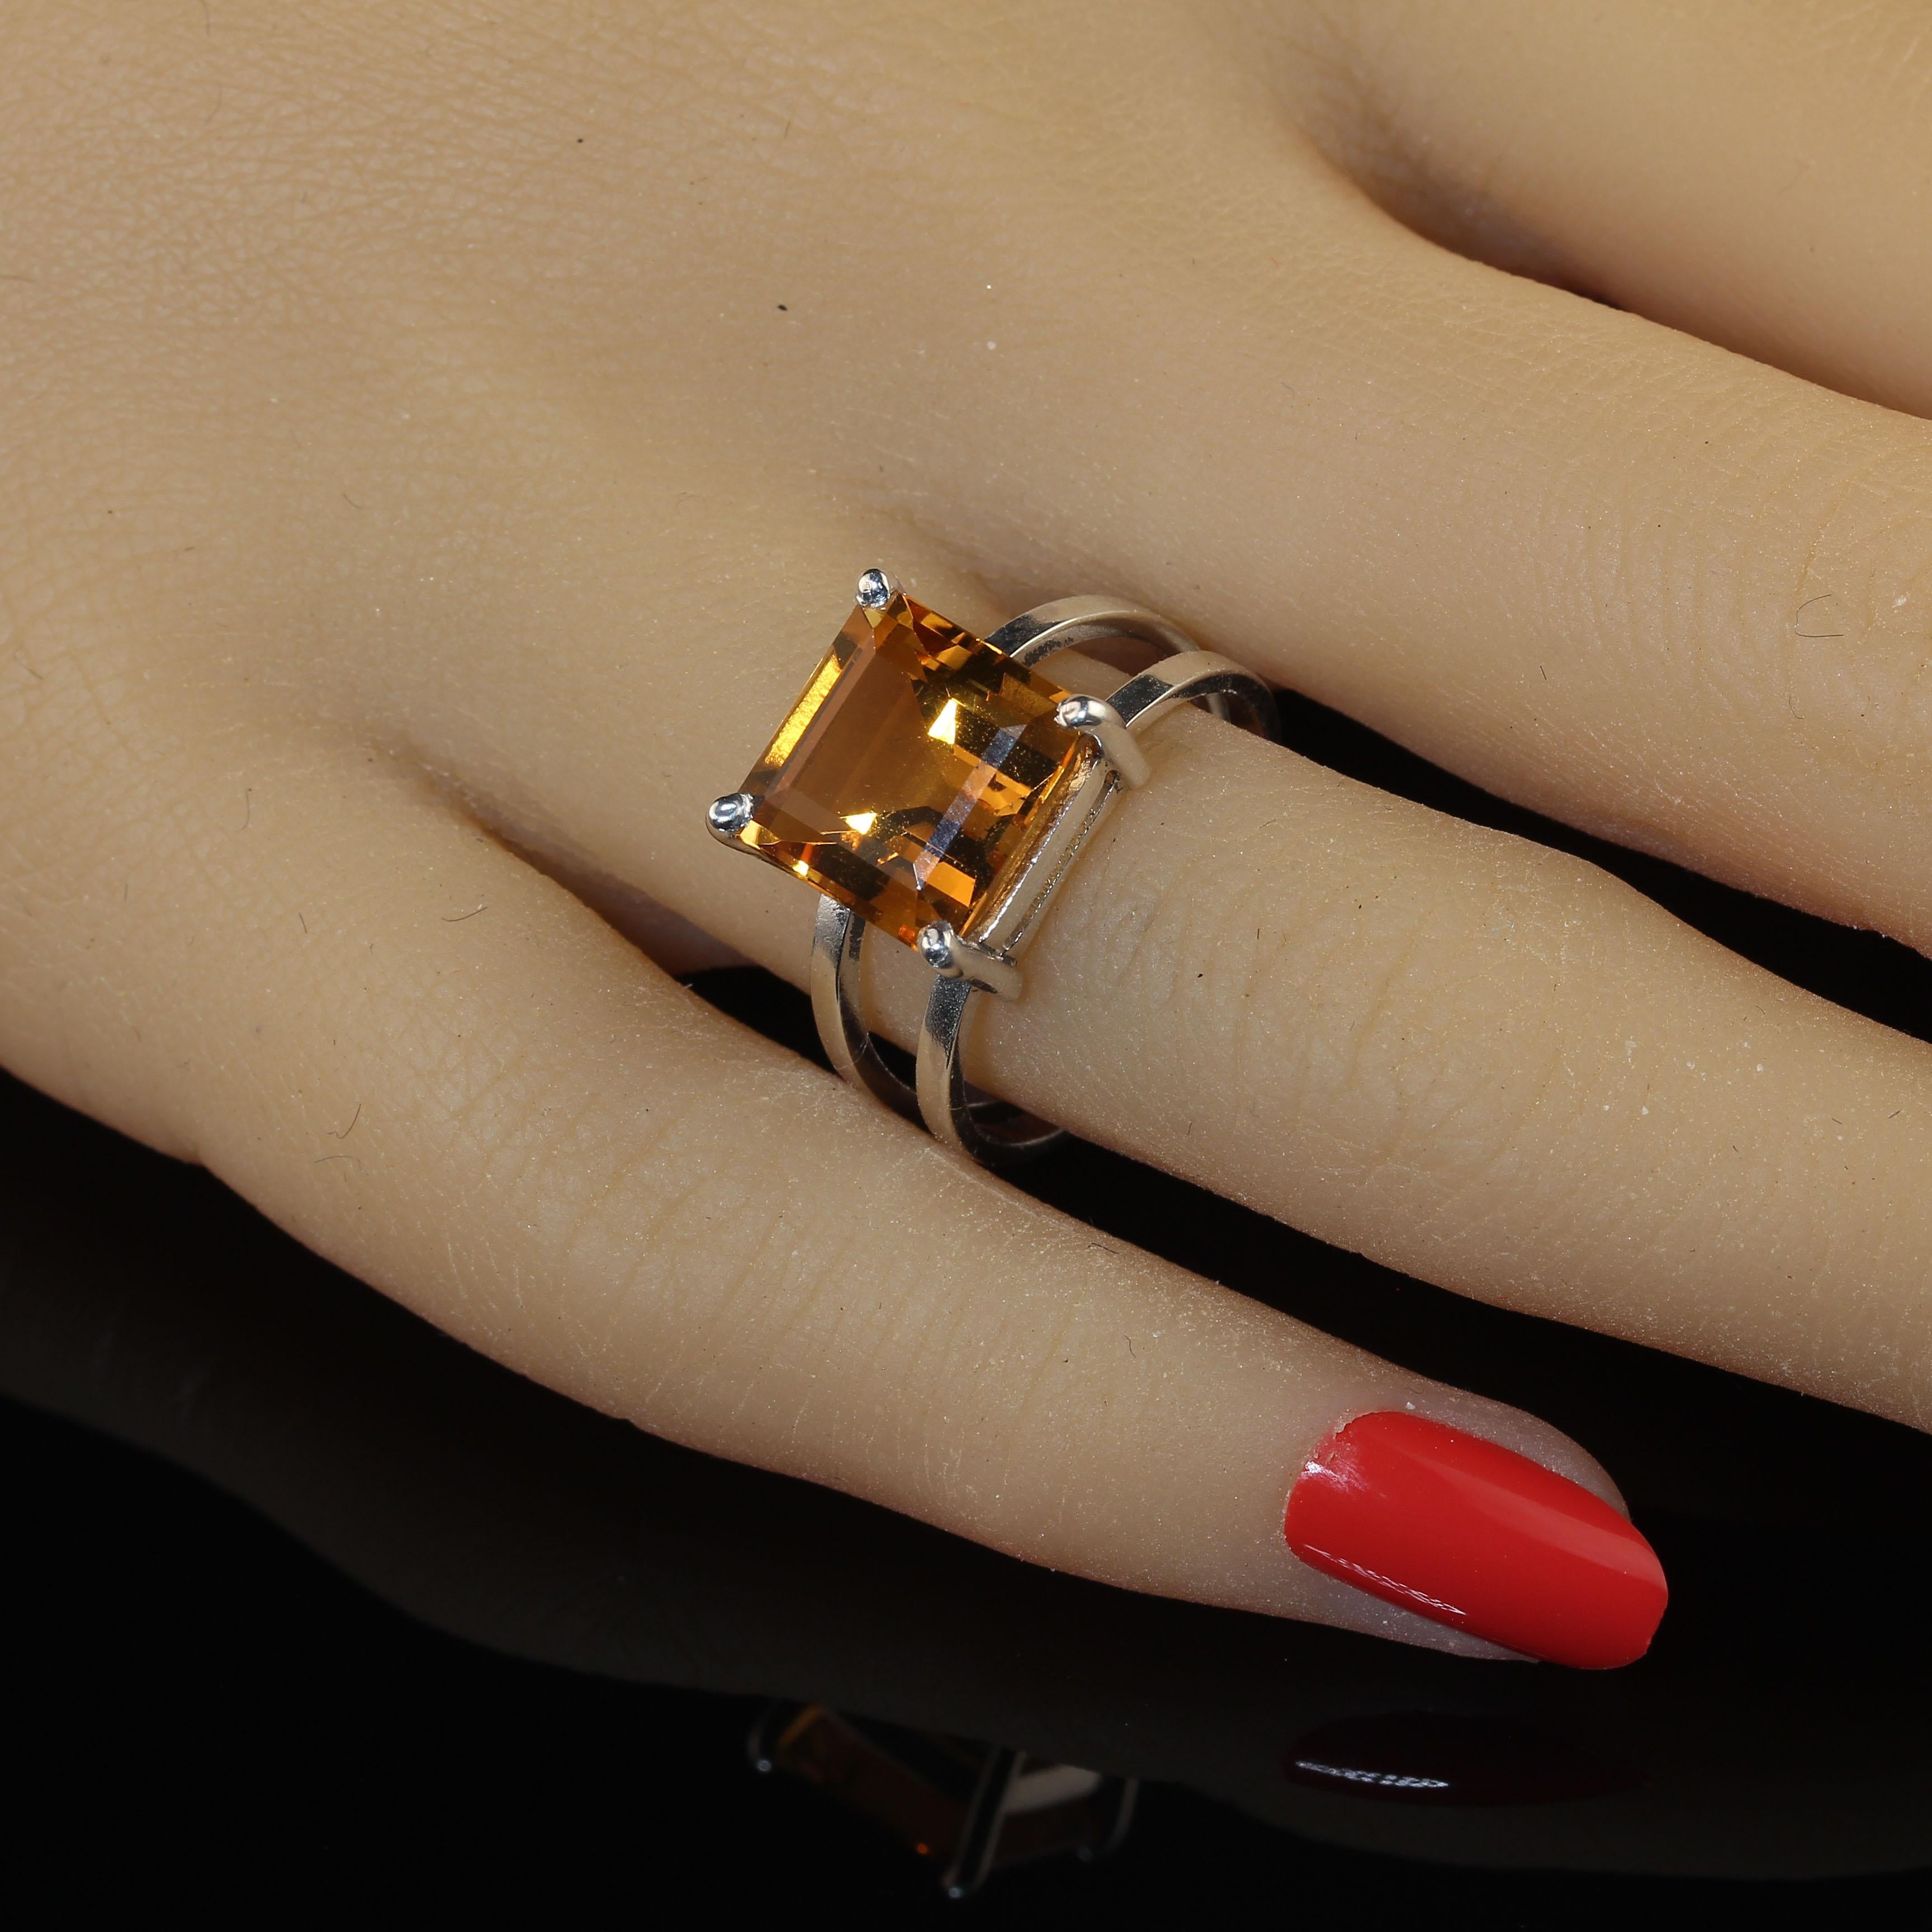 Unusual square cut 5.1CT Citrine in handmade Sterling Silver ring. This vibrant gemstone comes straight from our favorite vendor in Belo Horizonte, Minas Gerais, Brasil.  His craftsmen created the handmade Sterling Silver setting (2.95gms) to best